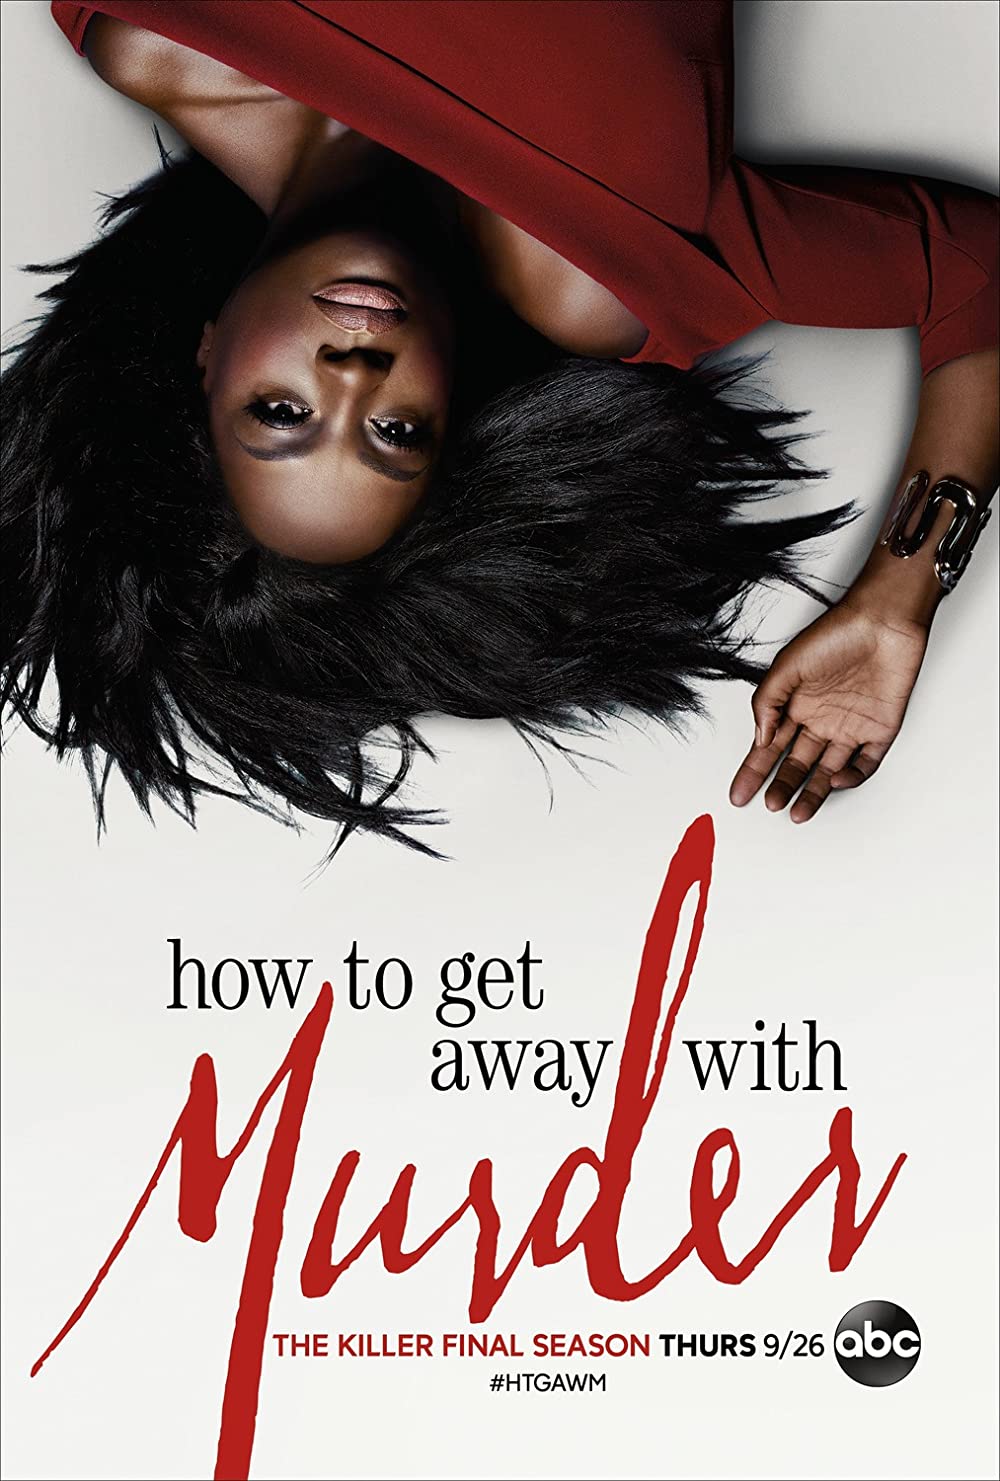 How to Get Away with Murder Season 3 DVD Release Date | Redbox, Netflix, iTunes, Amazon - How To Get Away From Murders Season 3